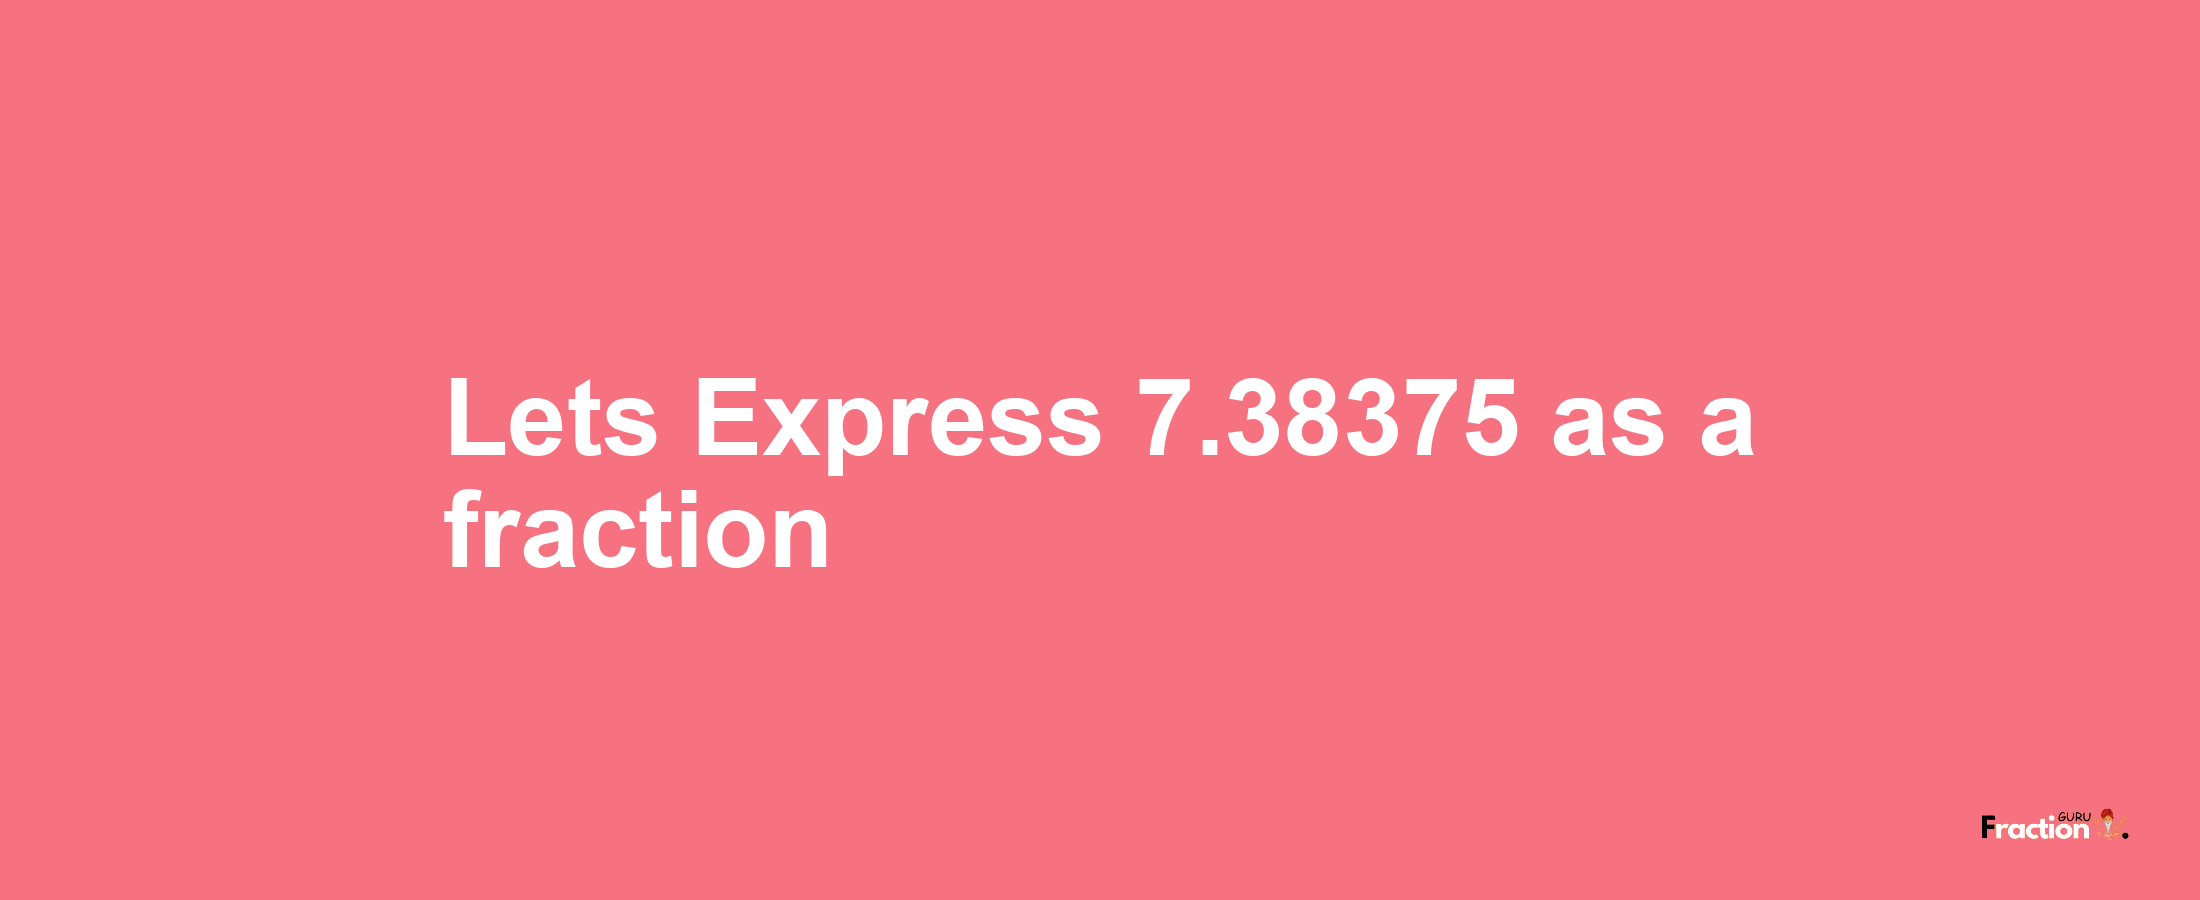 Lets Express 7.38375 as afraction